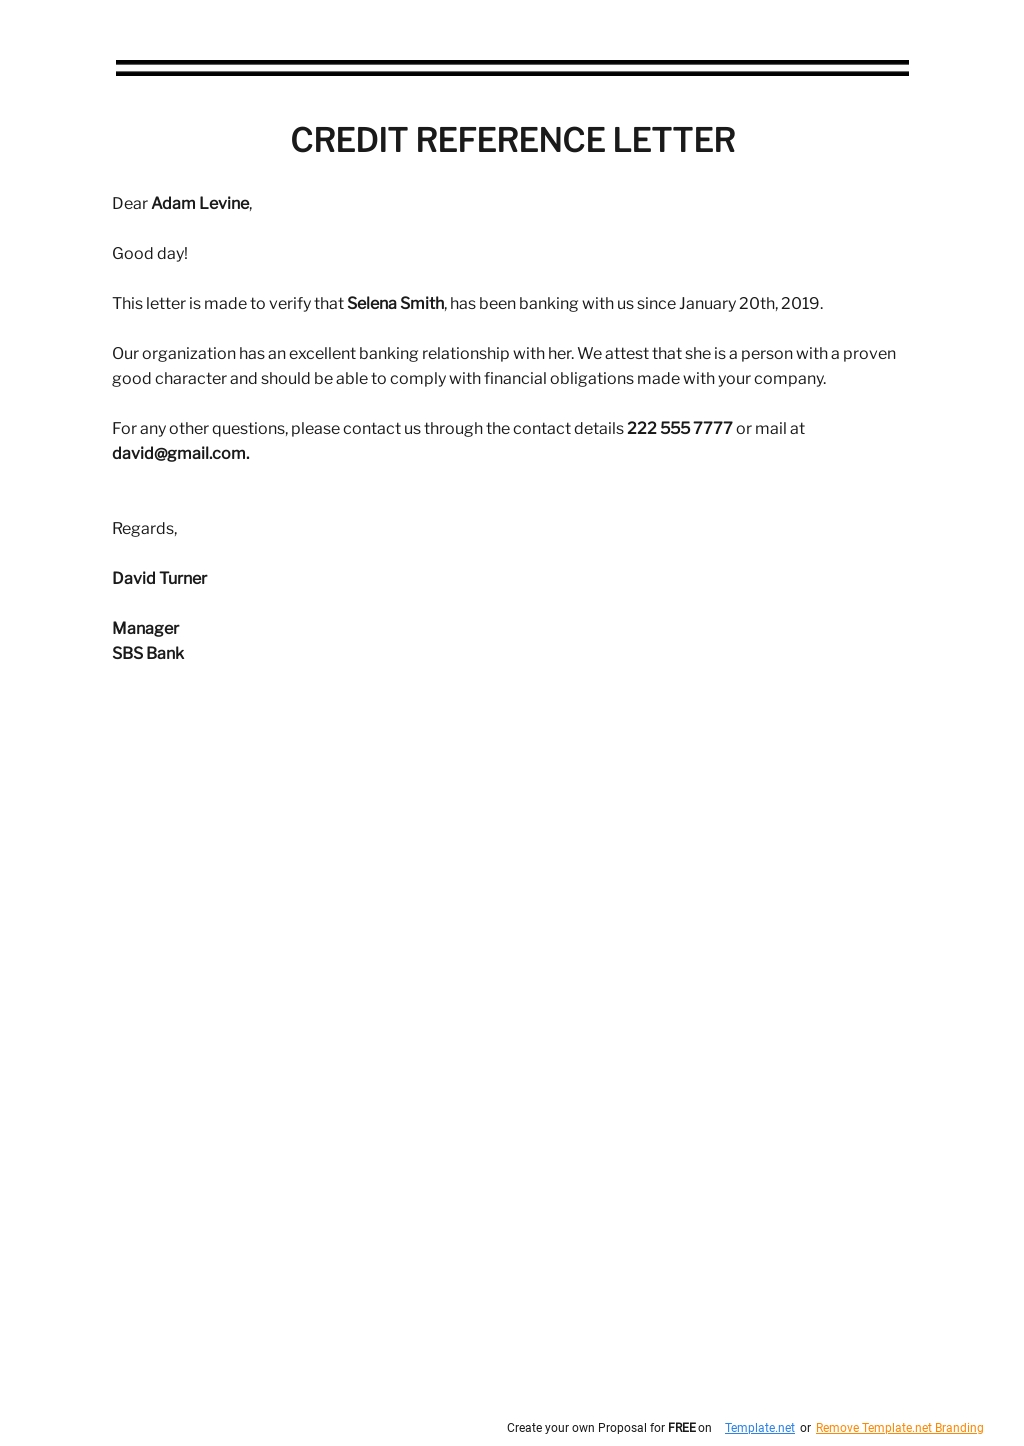 Free Credit Reference Letter Template - Google Docs, Word